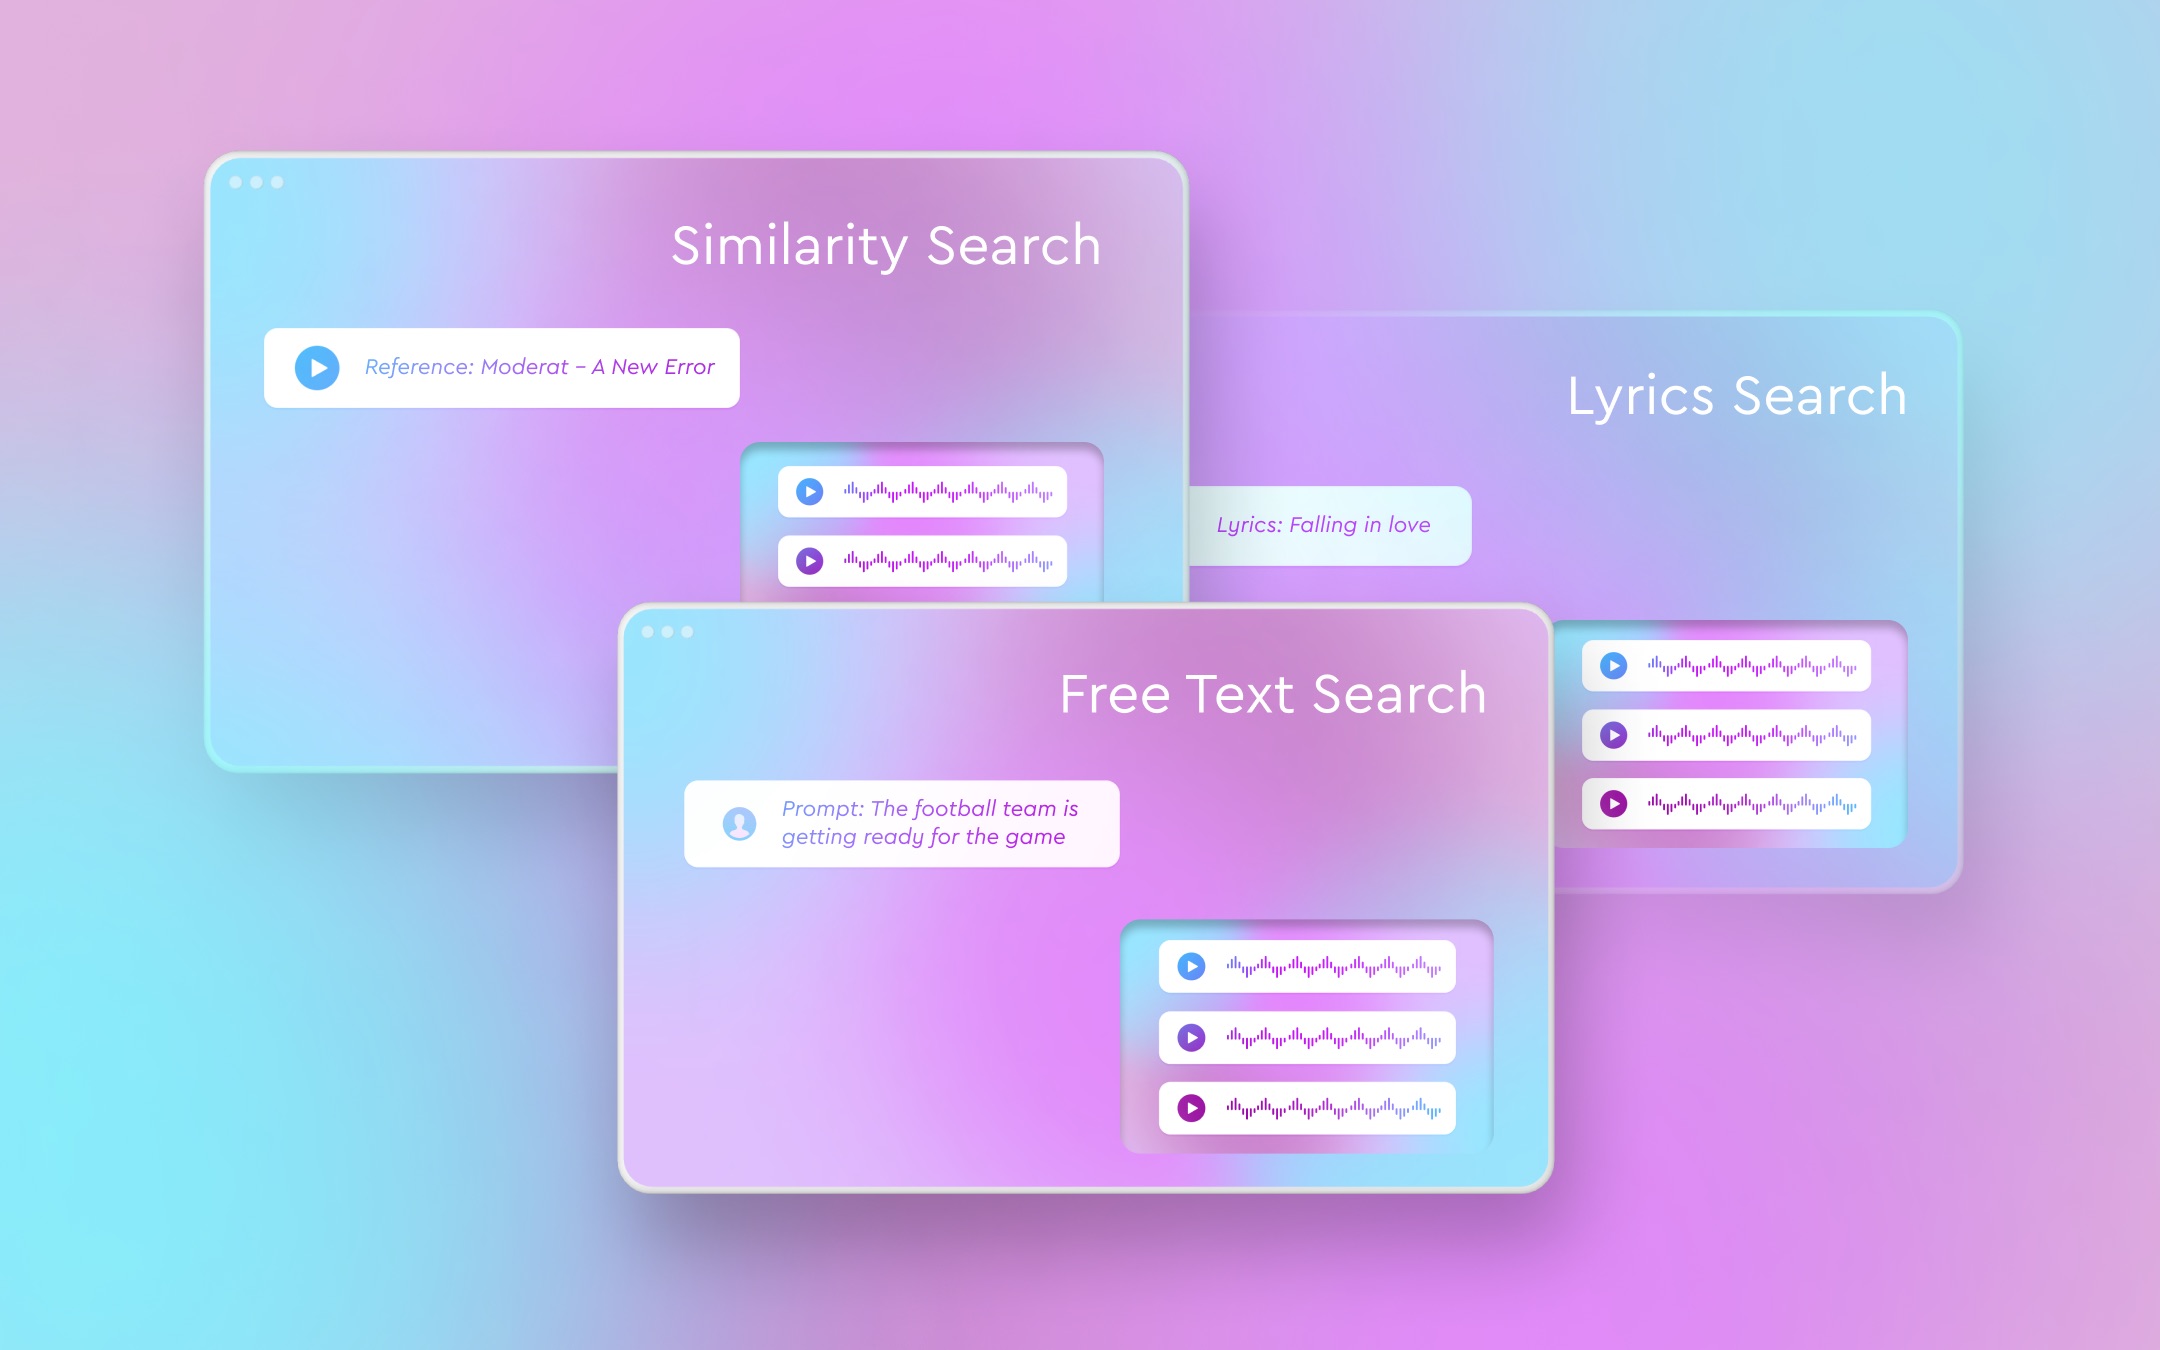 Similarity Search, Free Text Search and Lyrics Search